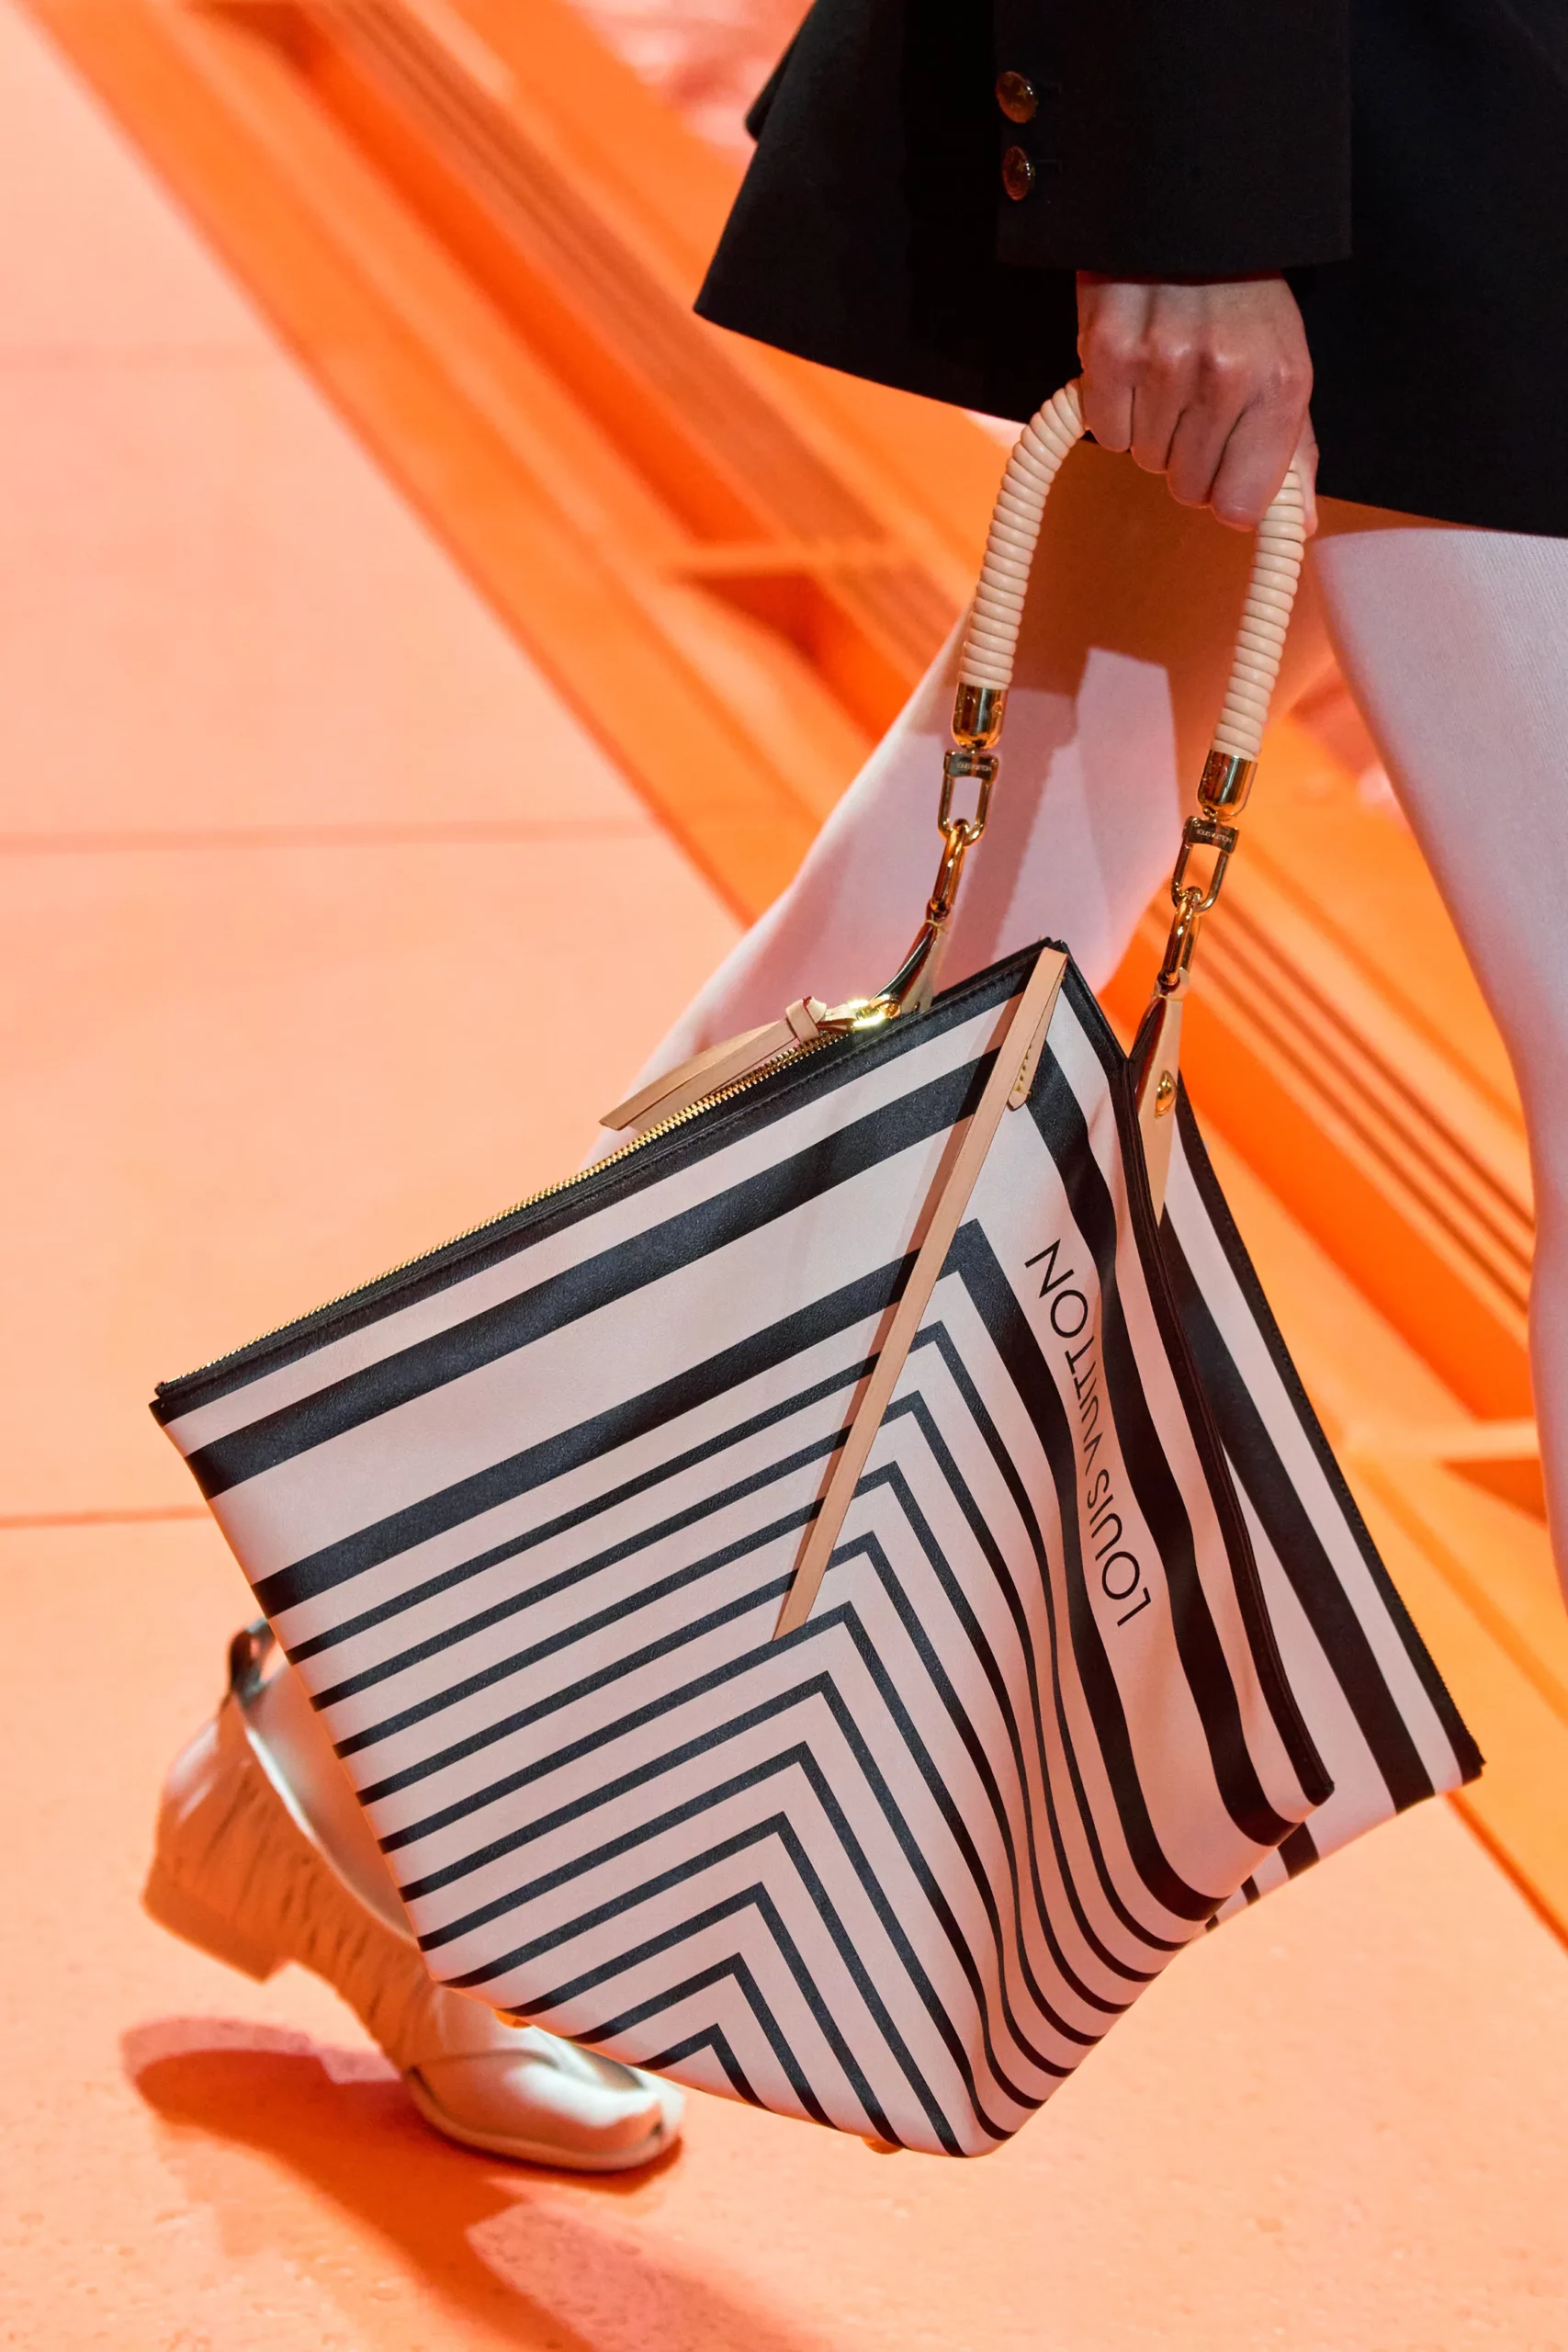 Louis Vuitton Spring/Summer 2021 Runway Bag Collection - Spotted